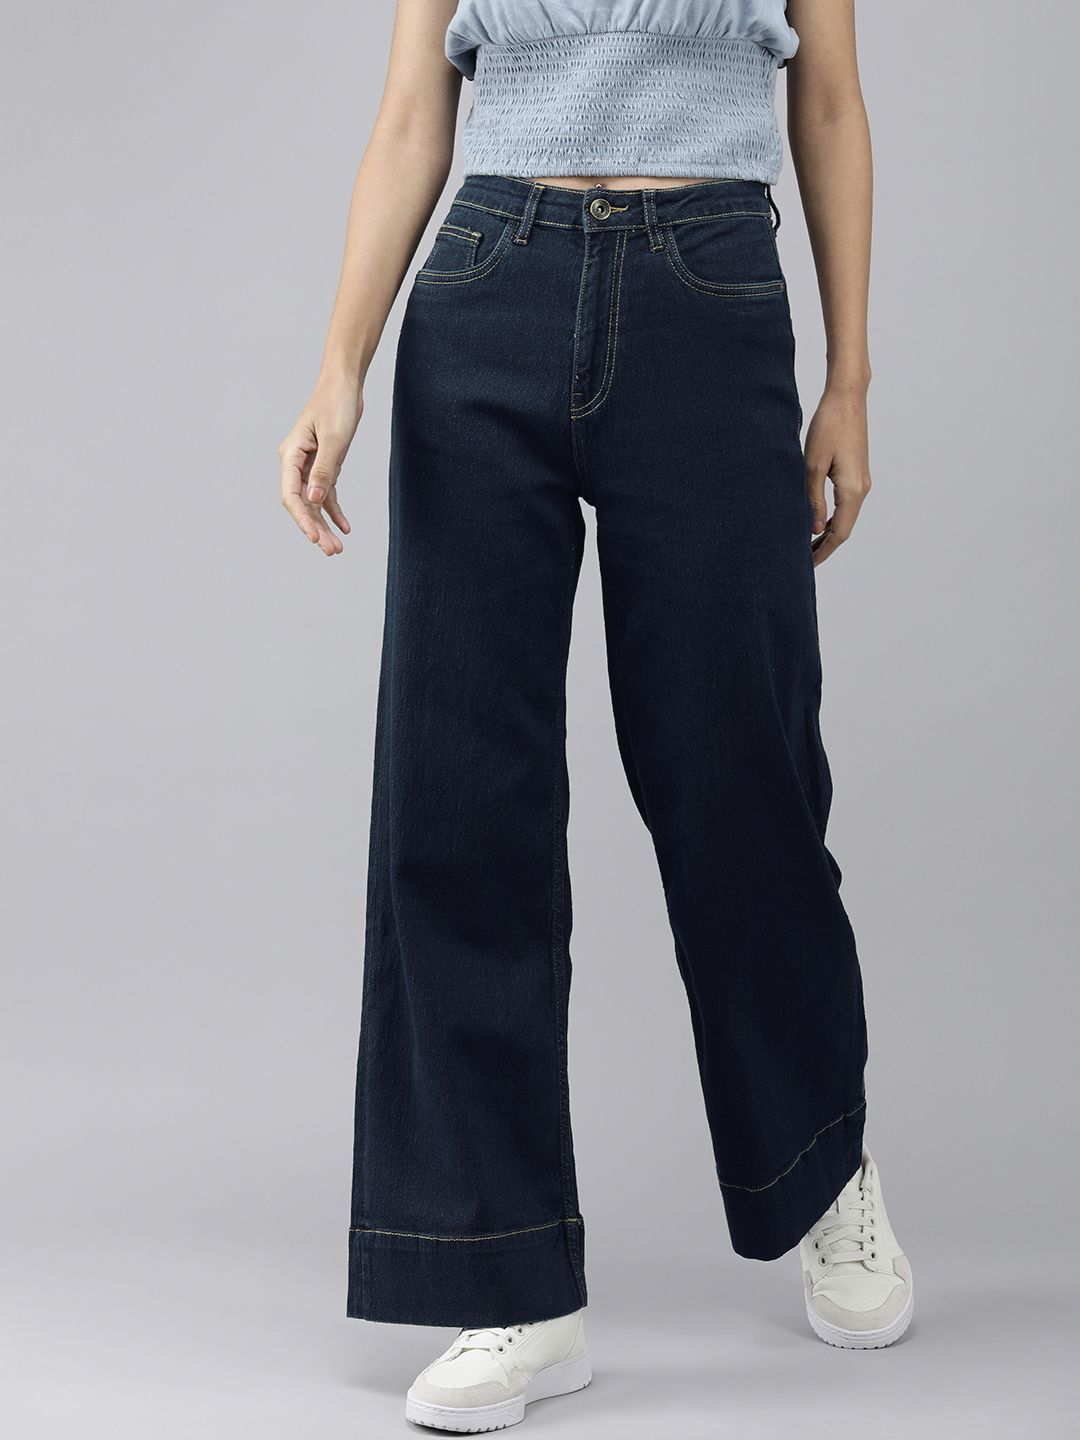 Roadster Women Navy Blue Wide Leg High-Rise Stretchable Jeans Price in India